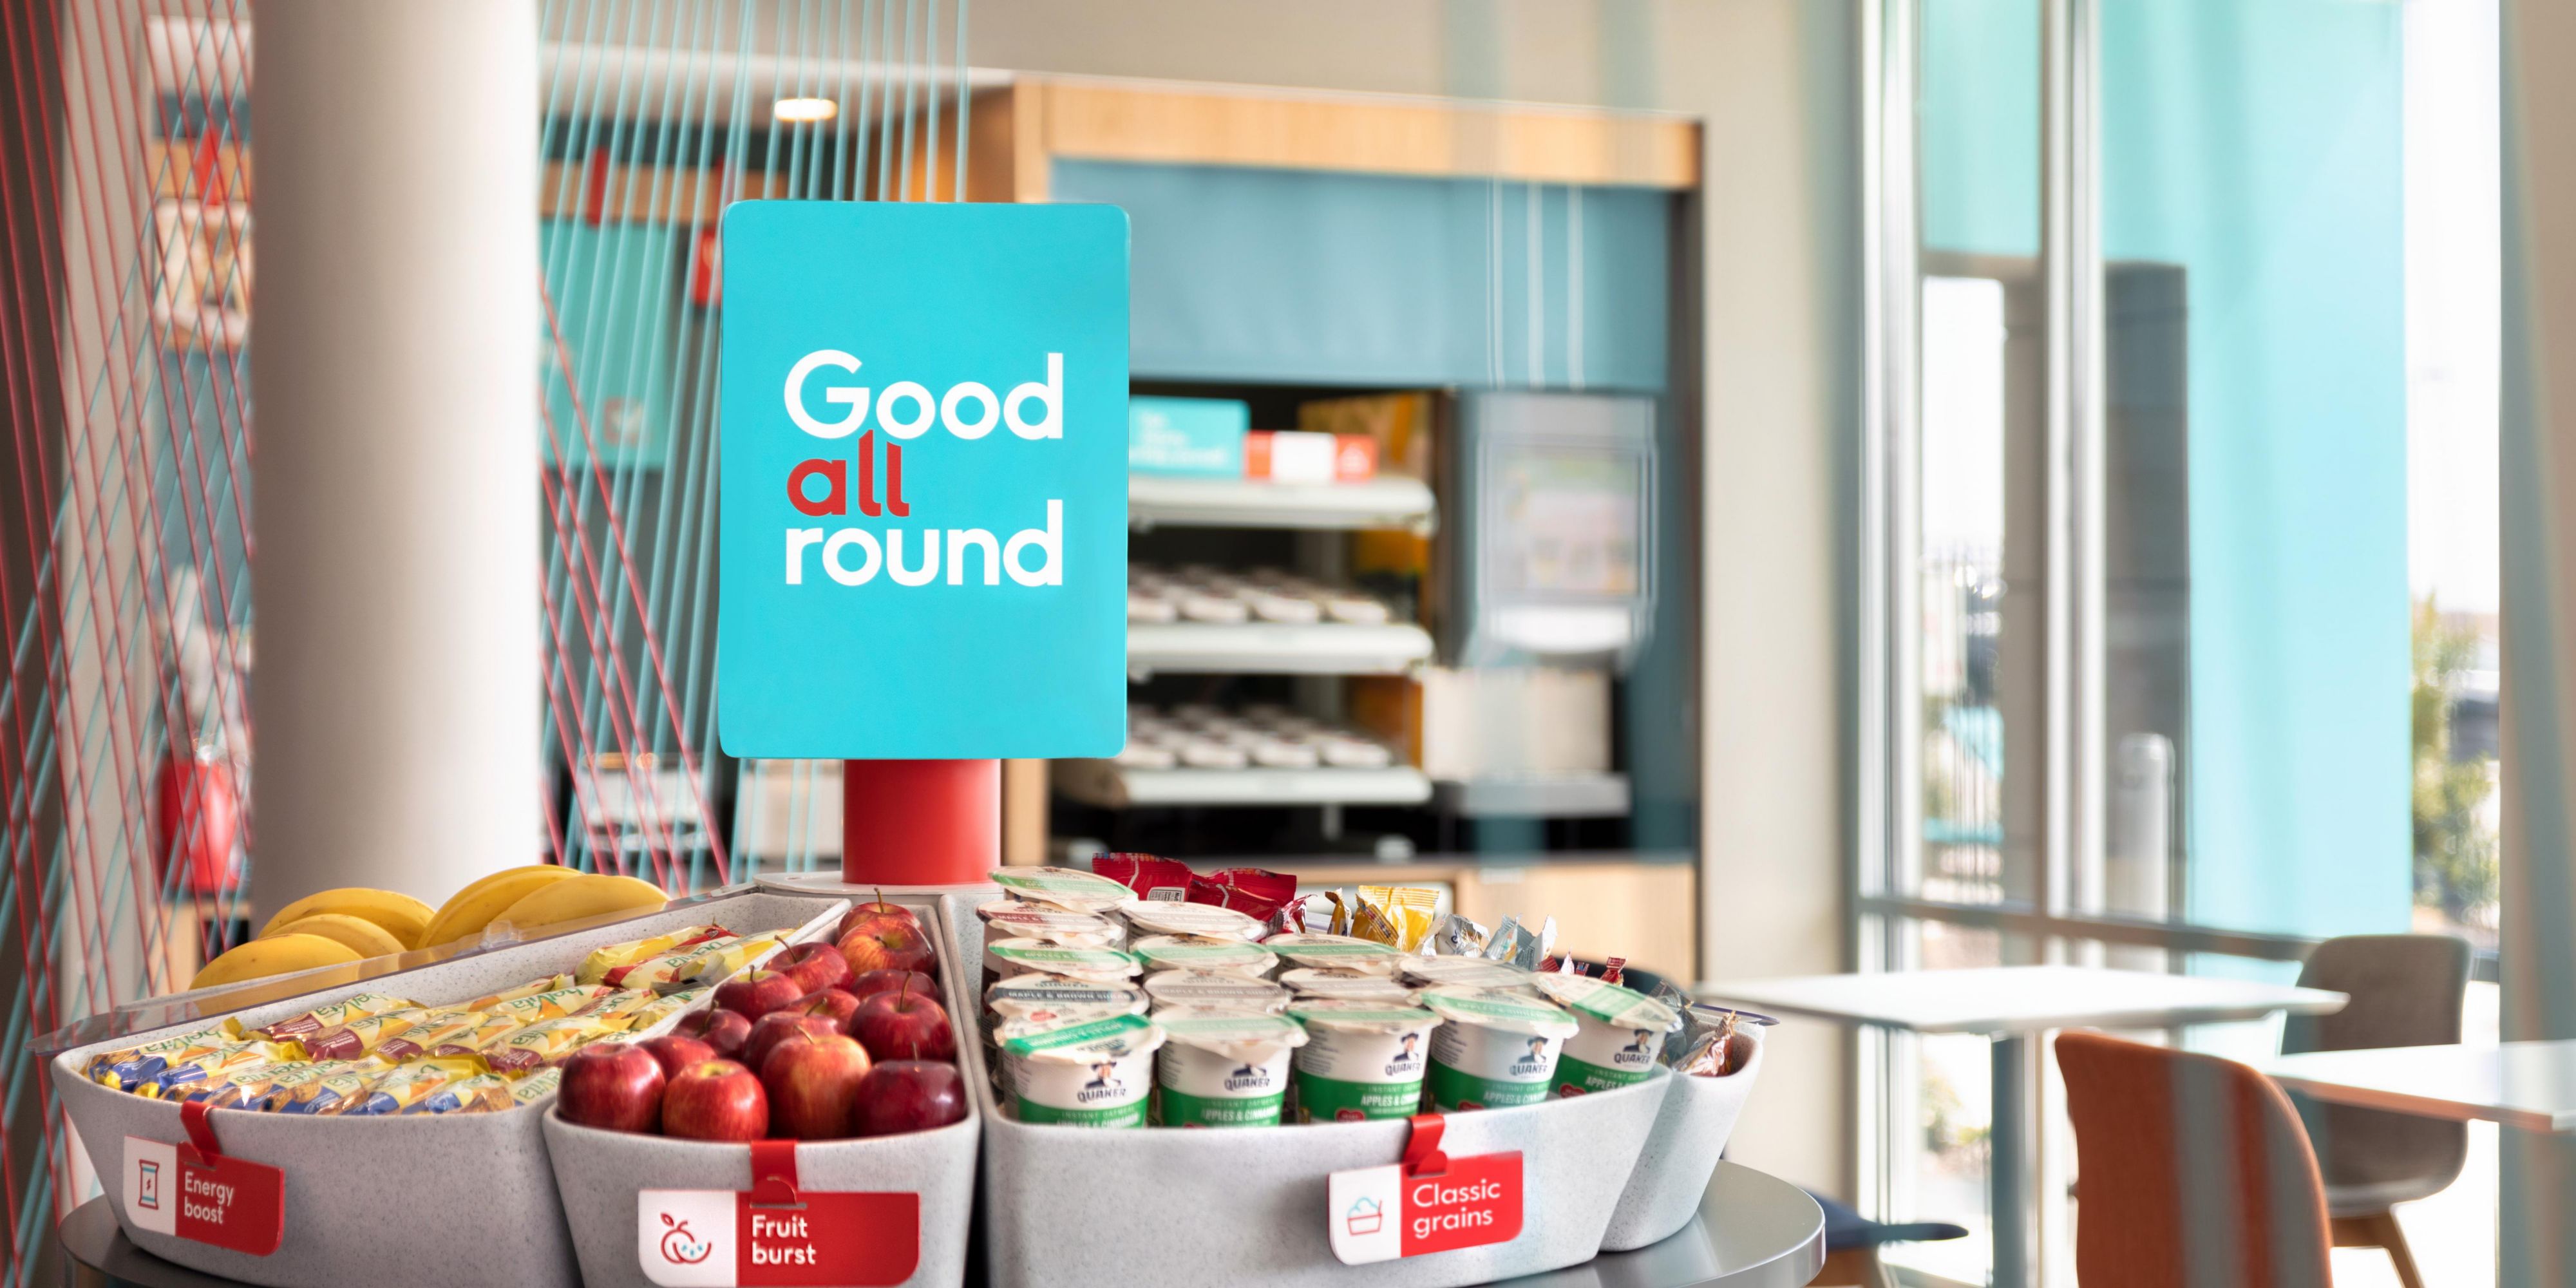 After a good night’s sleep, fill up on our free, high-quality breakfast. We offer a variety of grab-and-go options, including rotating hot items.​